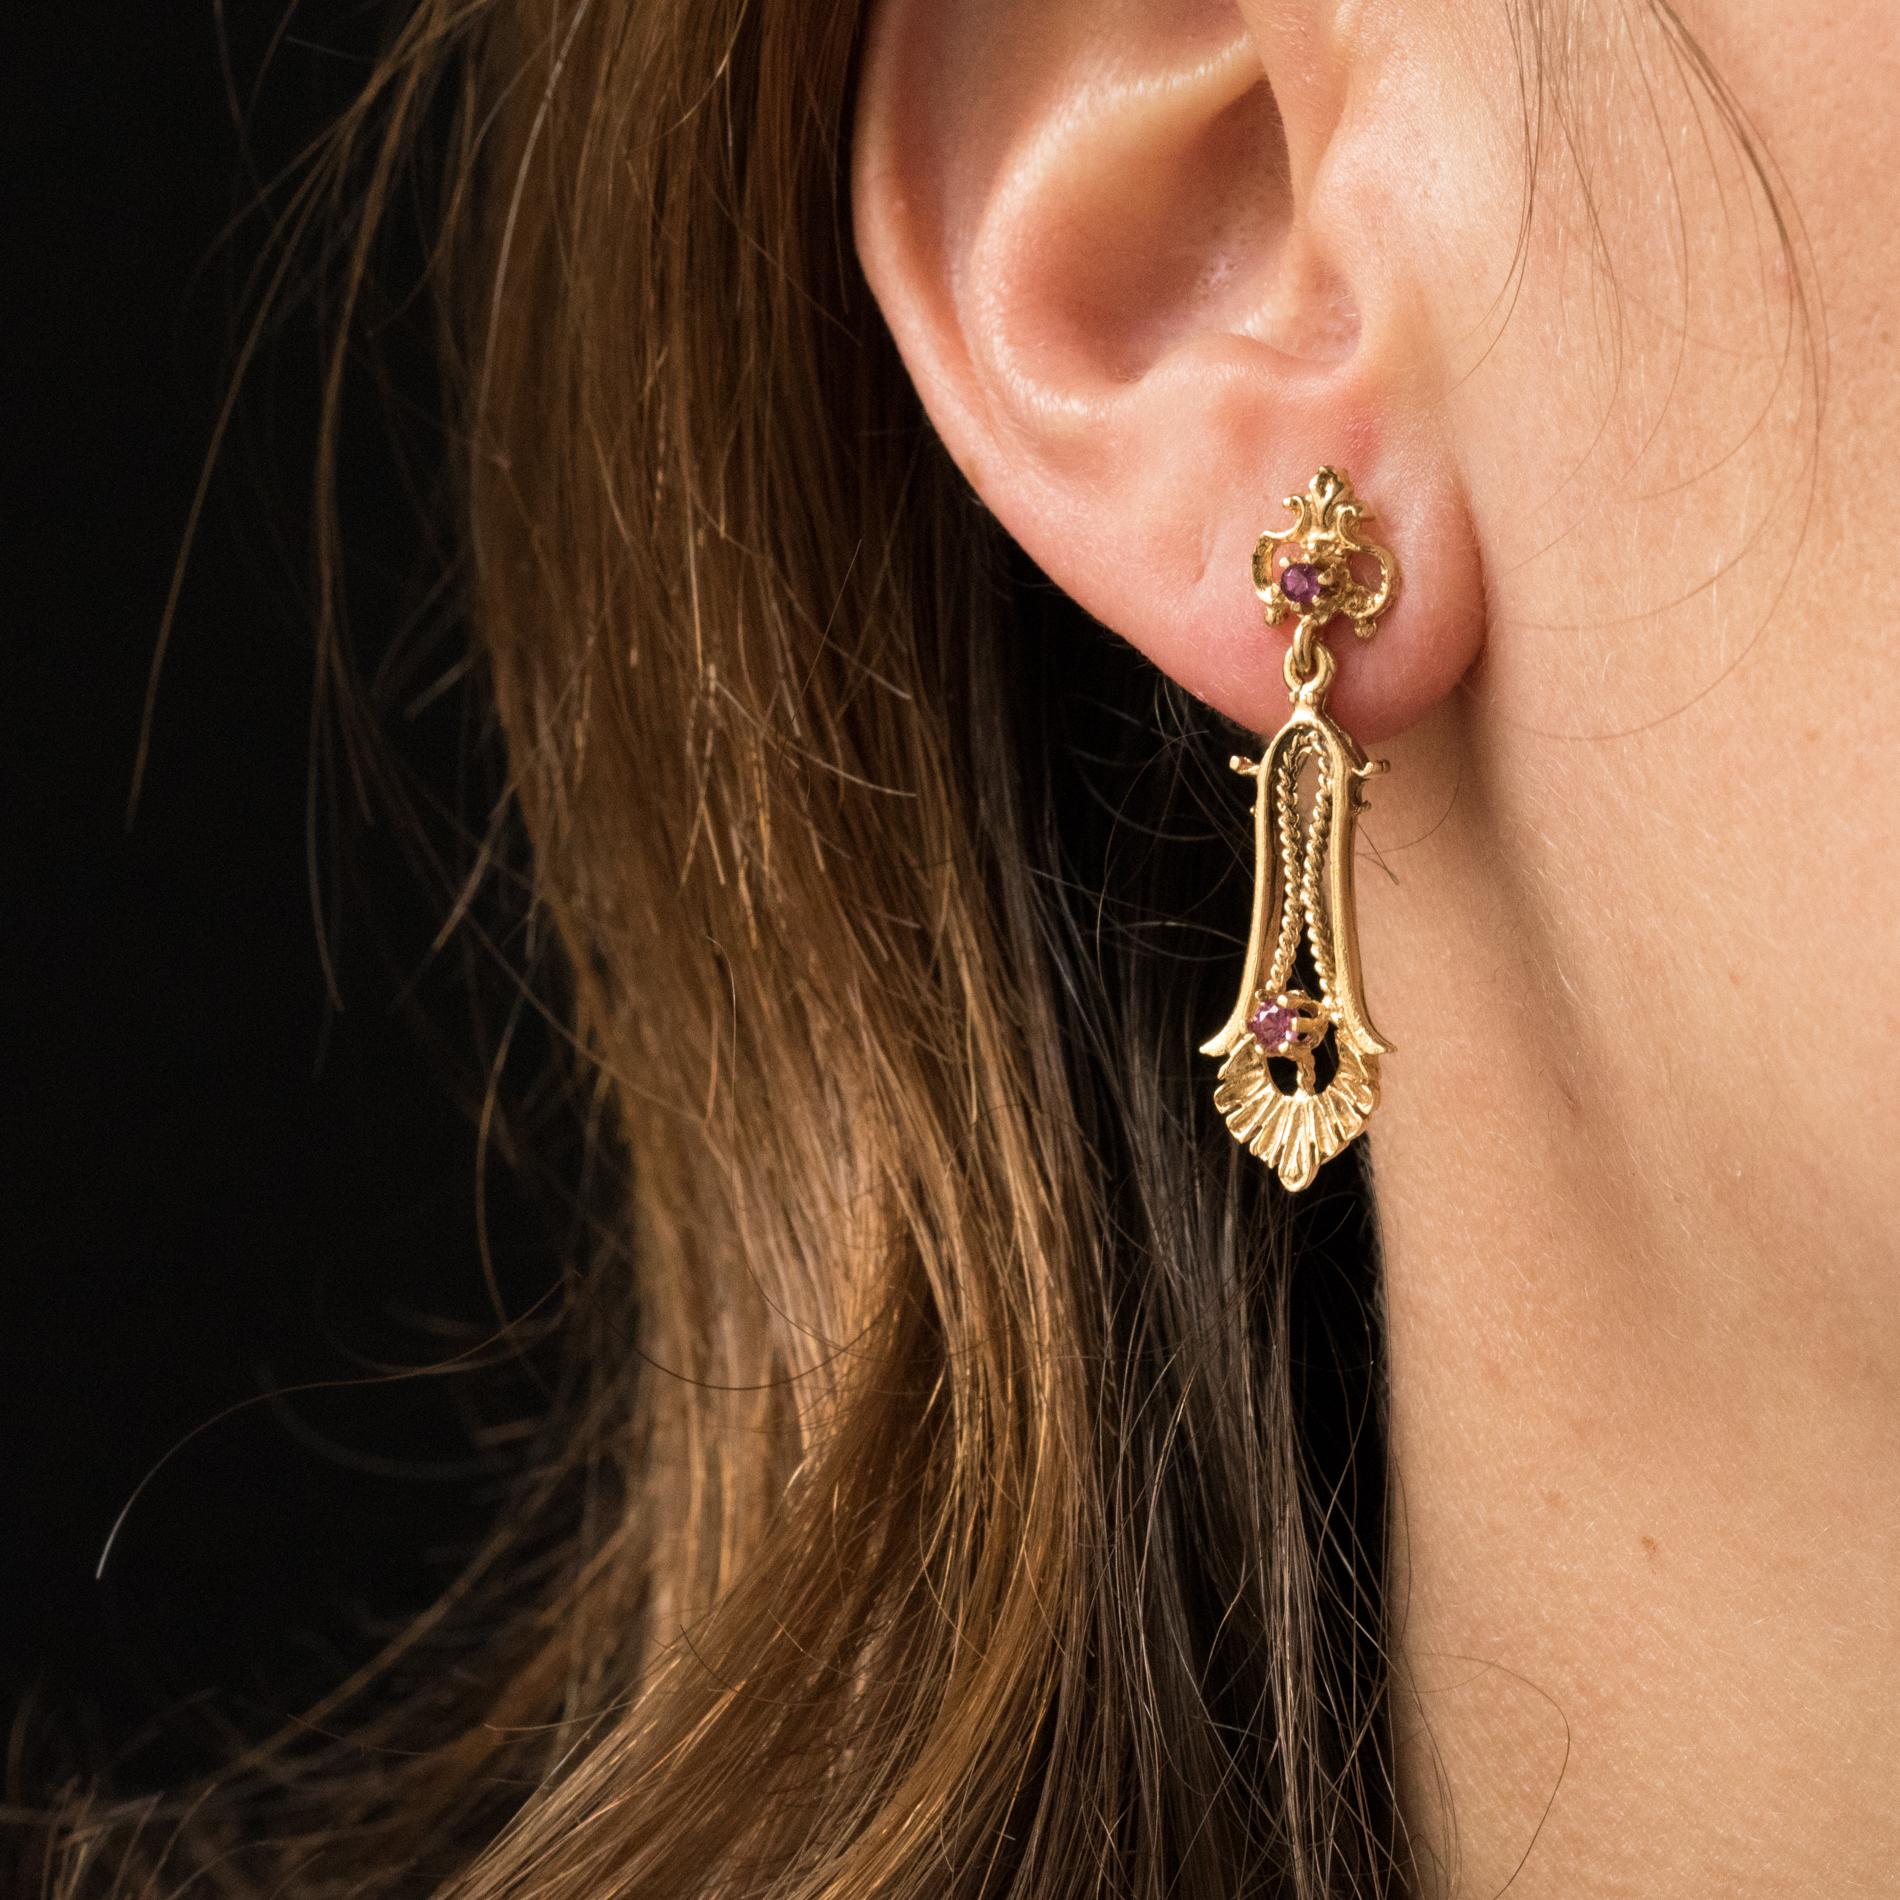 Earrings in 14 karats yellow gold.
Pretty dangle earrings, they are made of a perforated pattern set in the center of a small pink stone that holds in pendent an elongated pattern, chiseled and openwork with a gold cord. Another small pink stone is